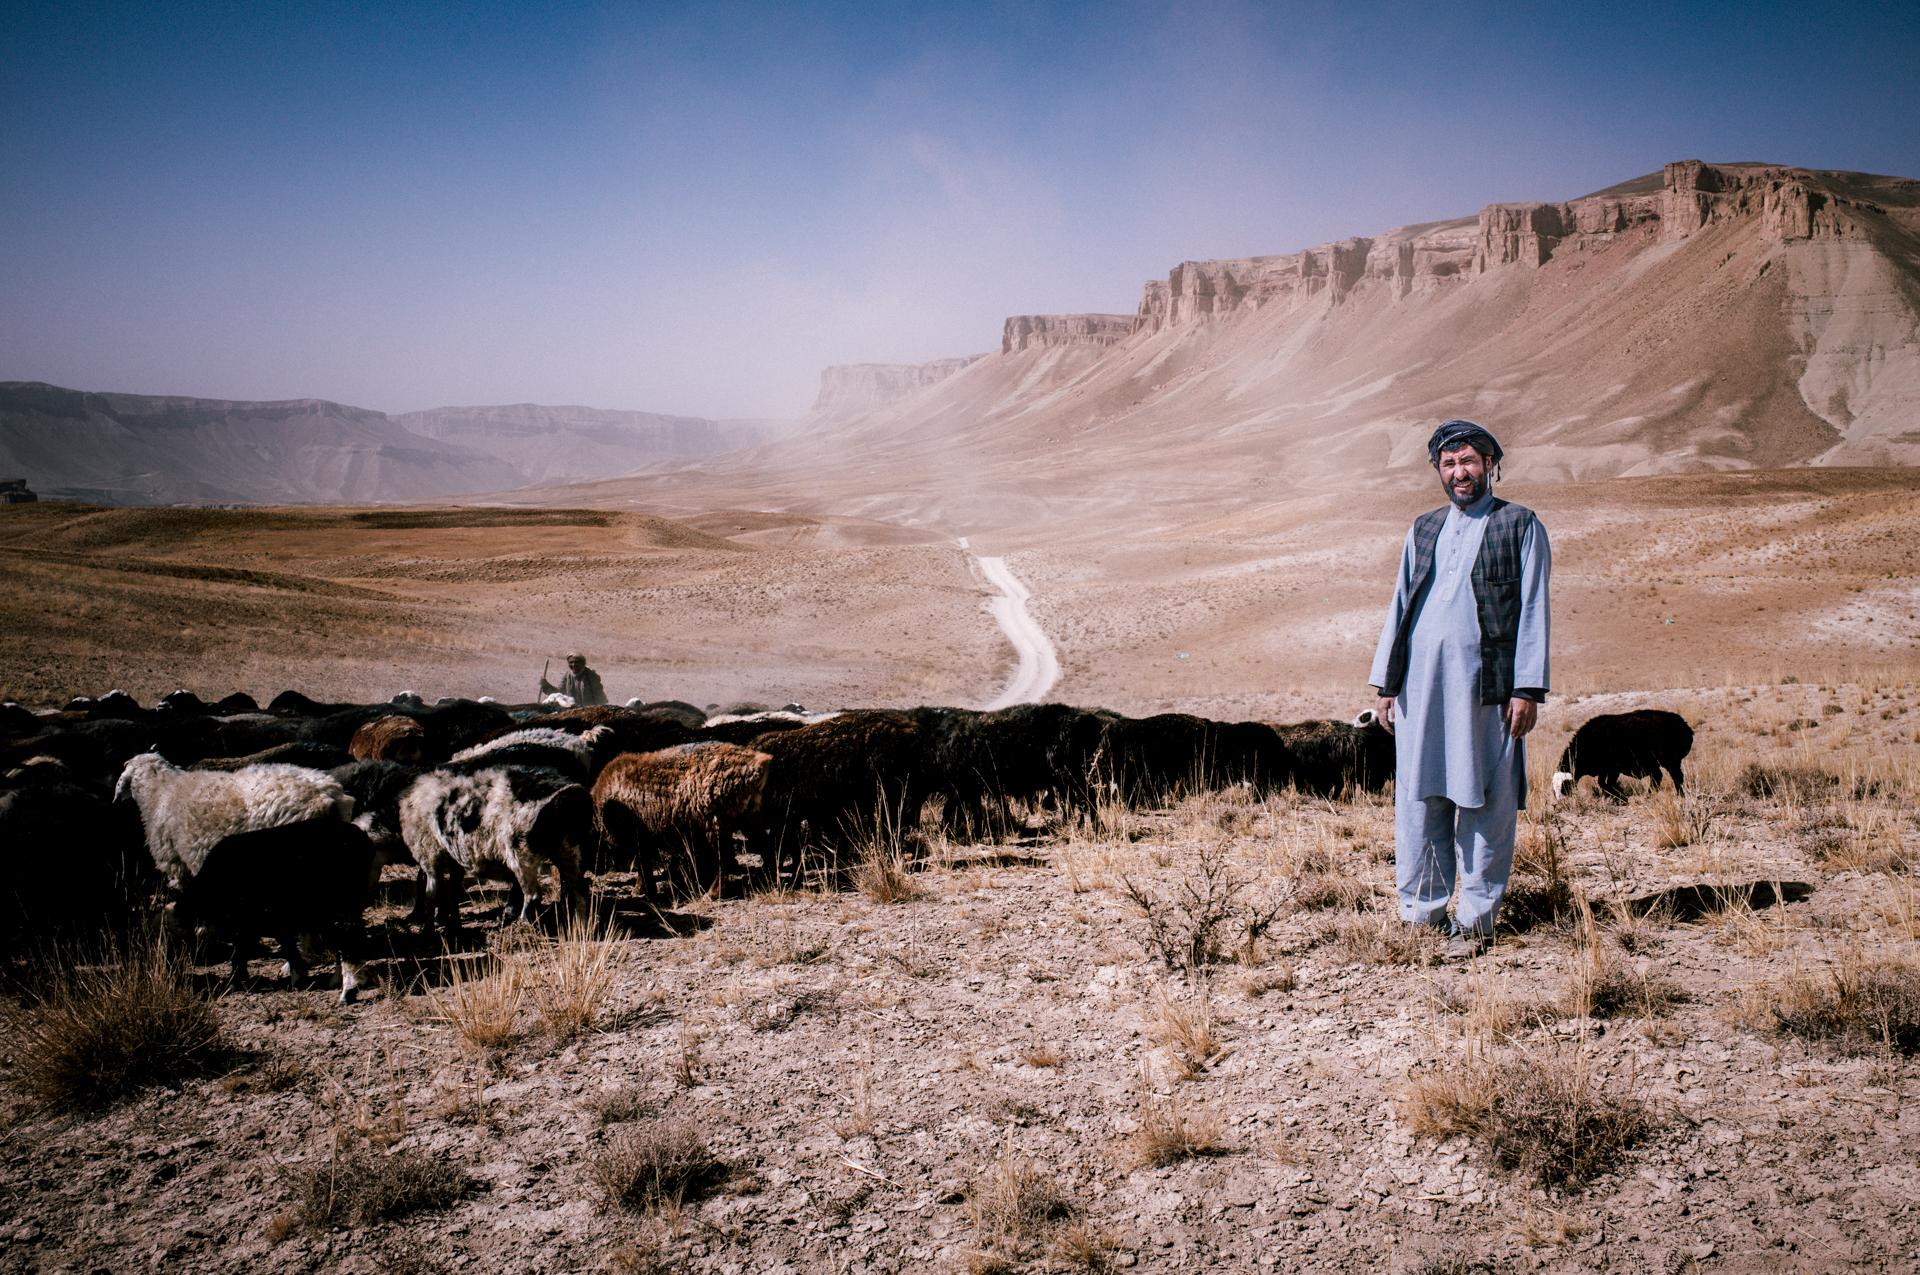 New York Photography Awards Winner - A Terrible Peace: Afghanistan's Descent into Deeper Poverty